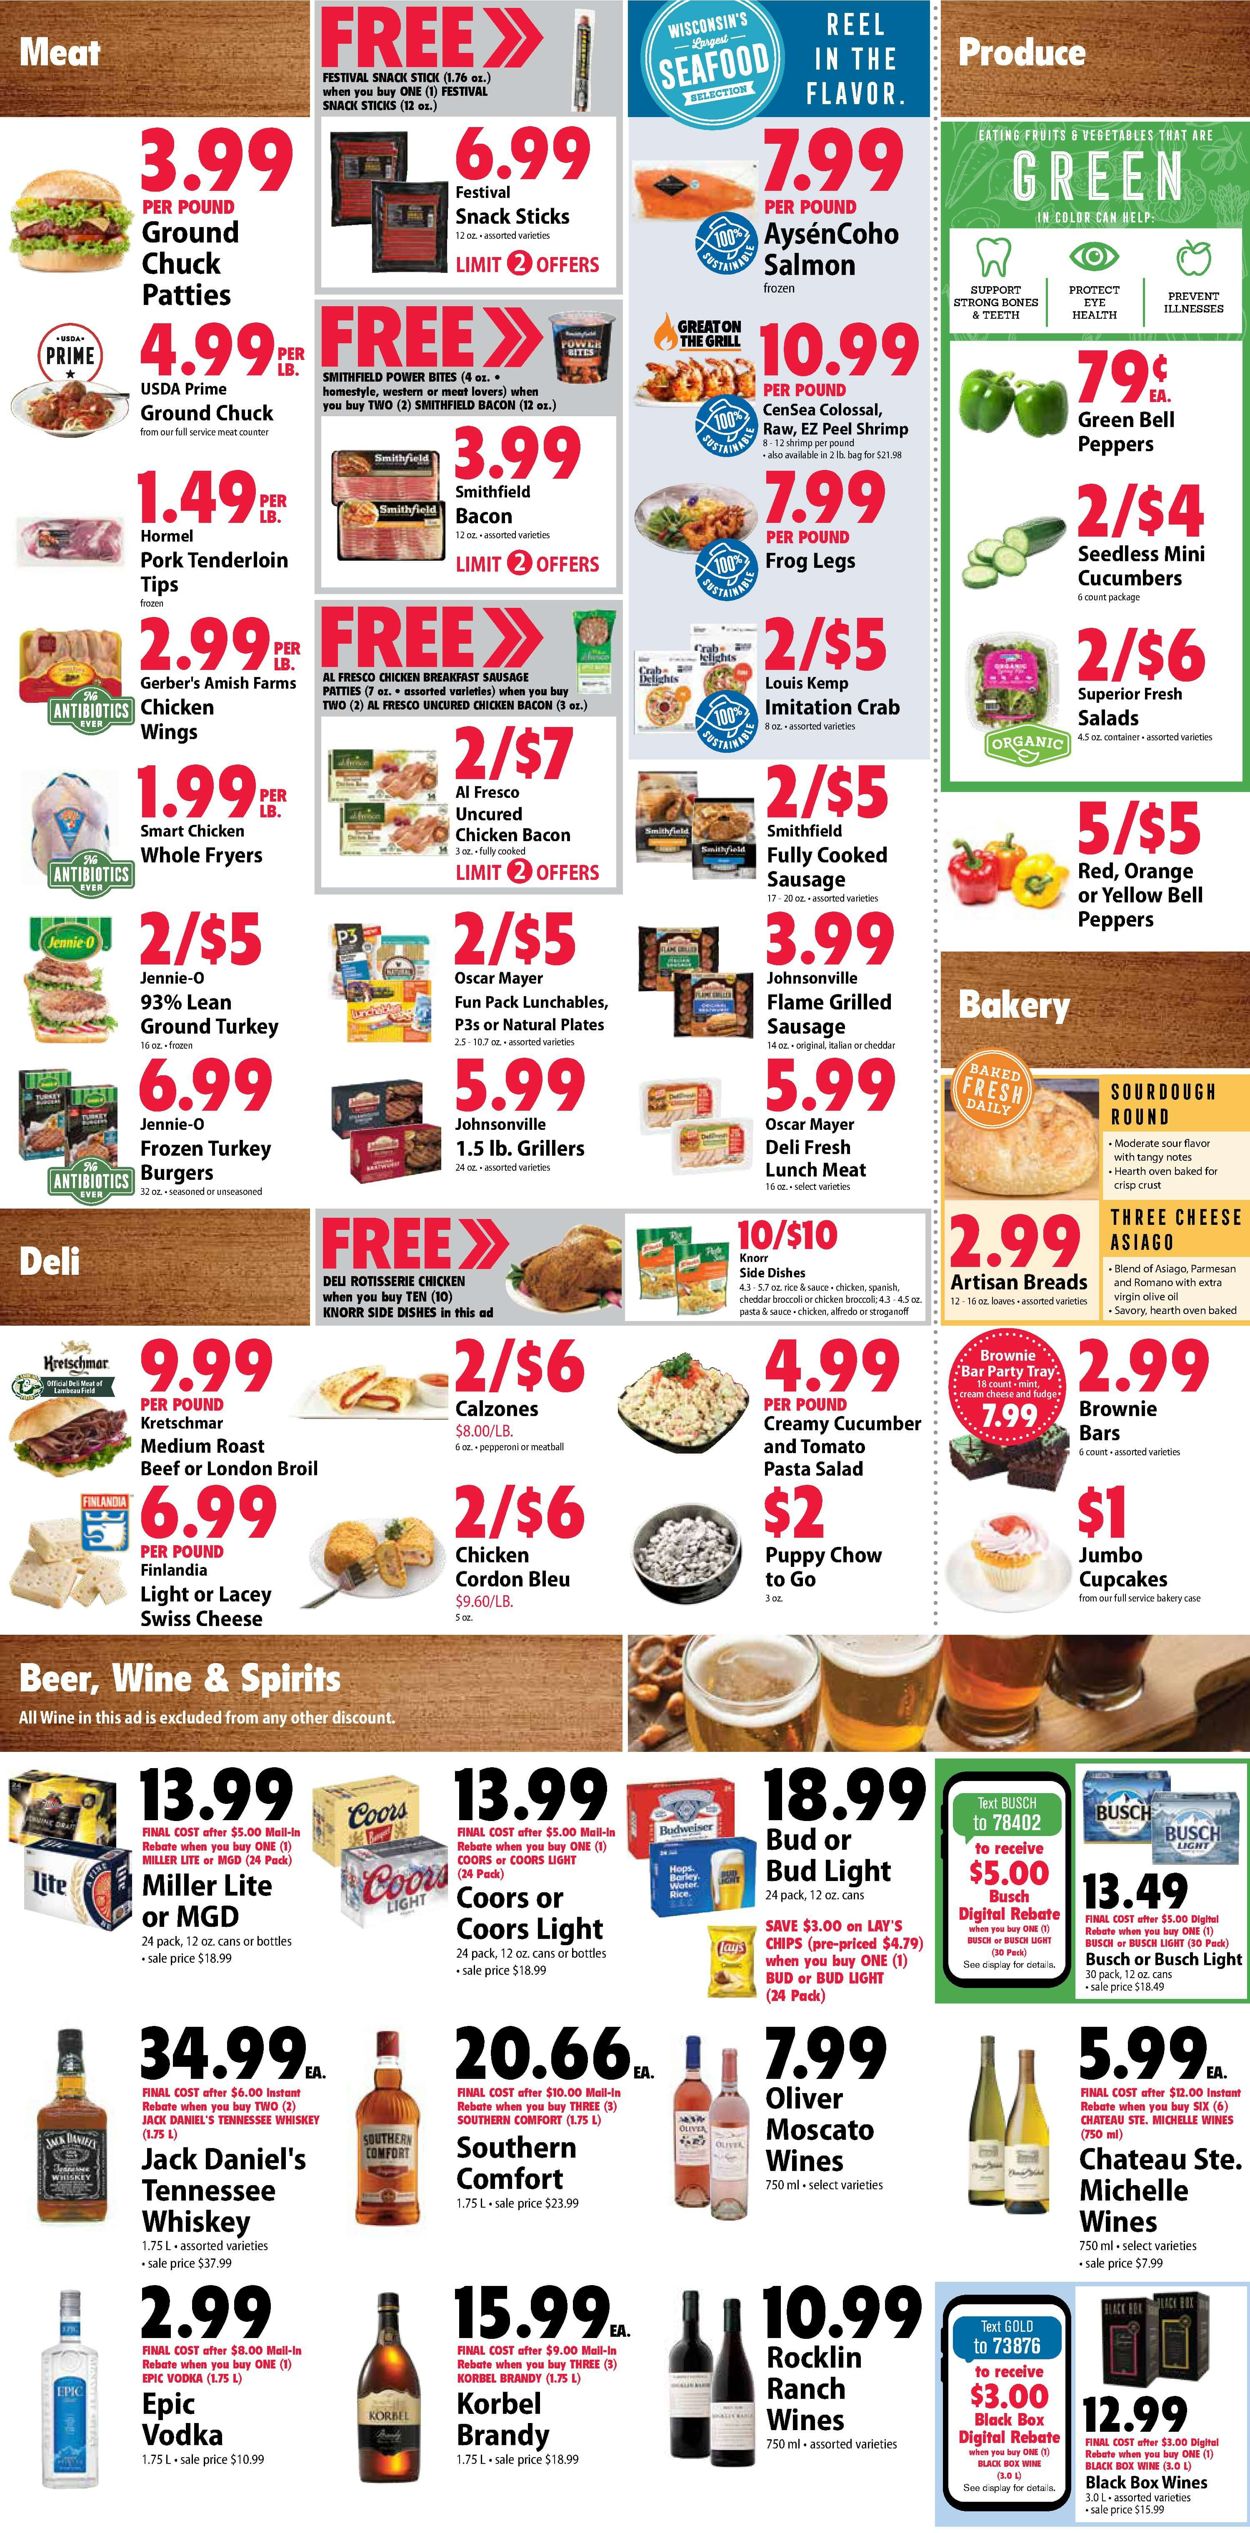 Festival Foods Current weekly ad 04/07 - 04/13/2021 [2] - frequent-ads.com